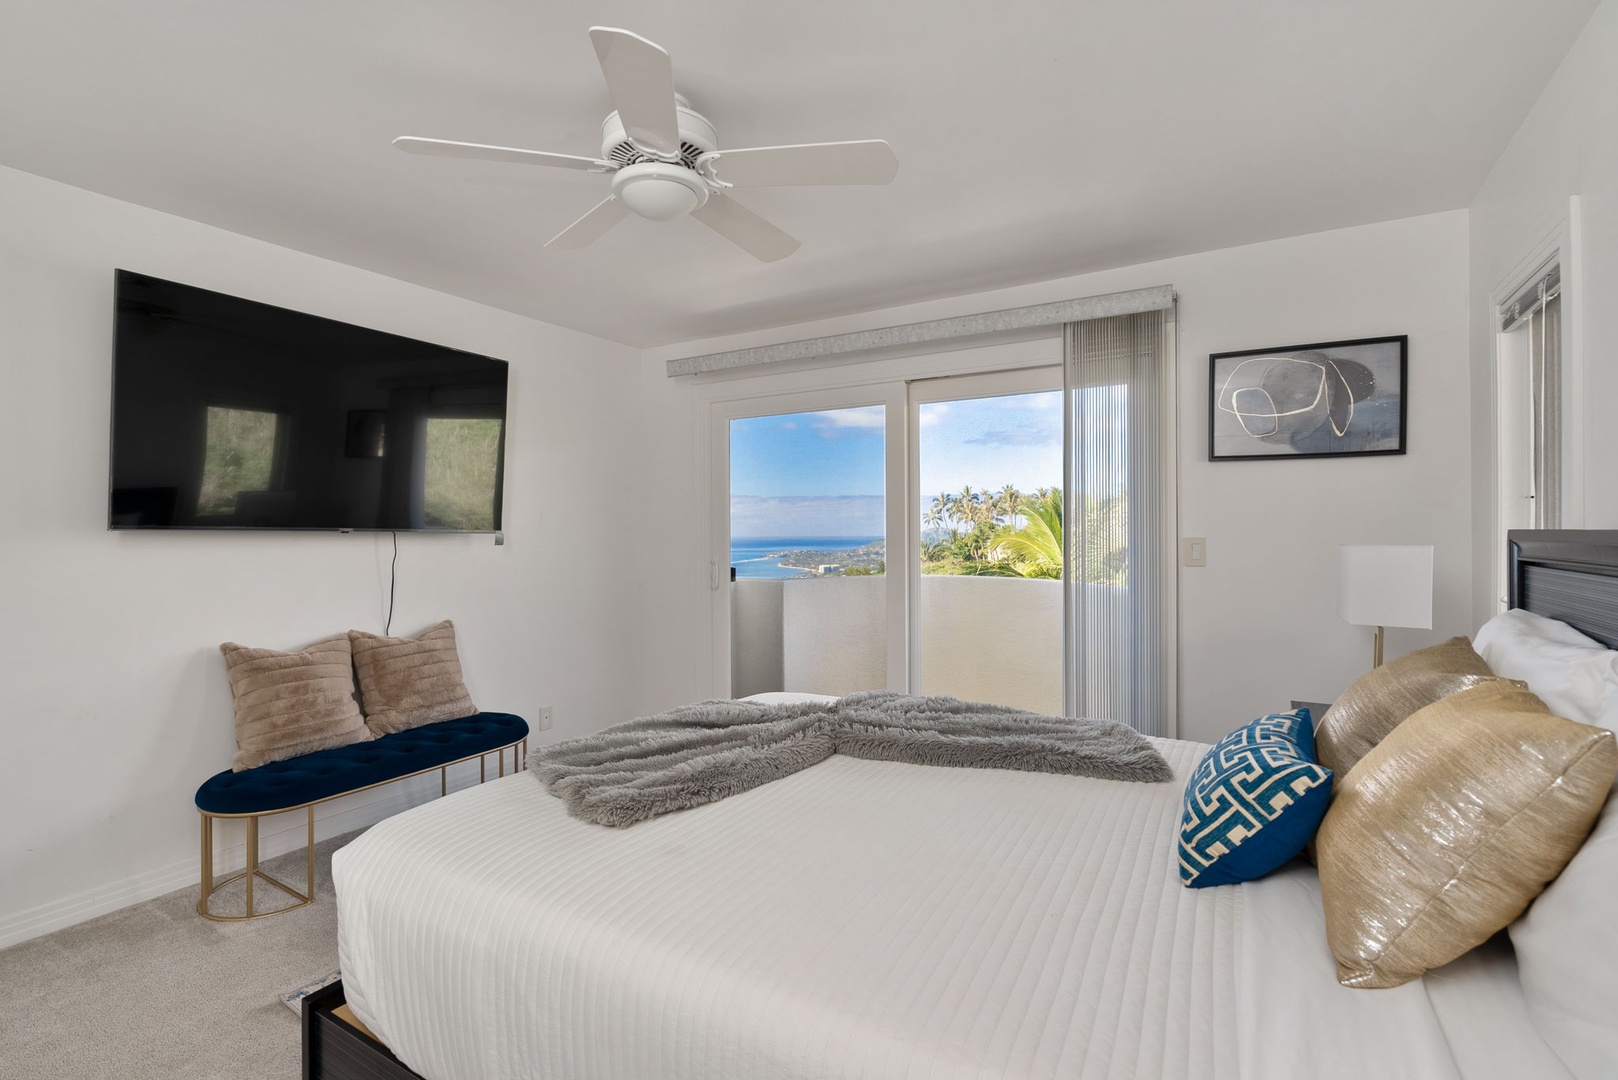 Honolulu Vacation Rentals, Hawaii Ridge Getaway - Guest bedroom with TV and private lanai.